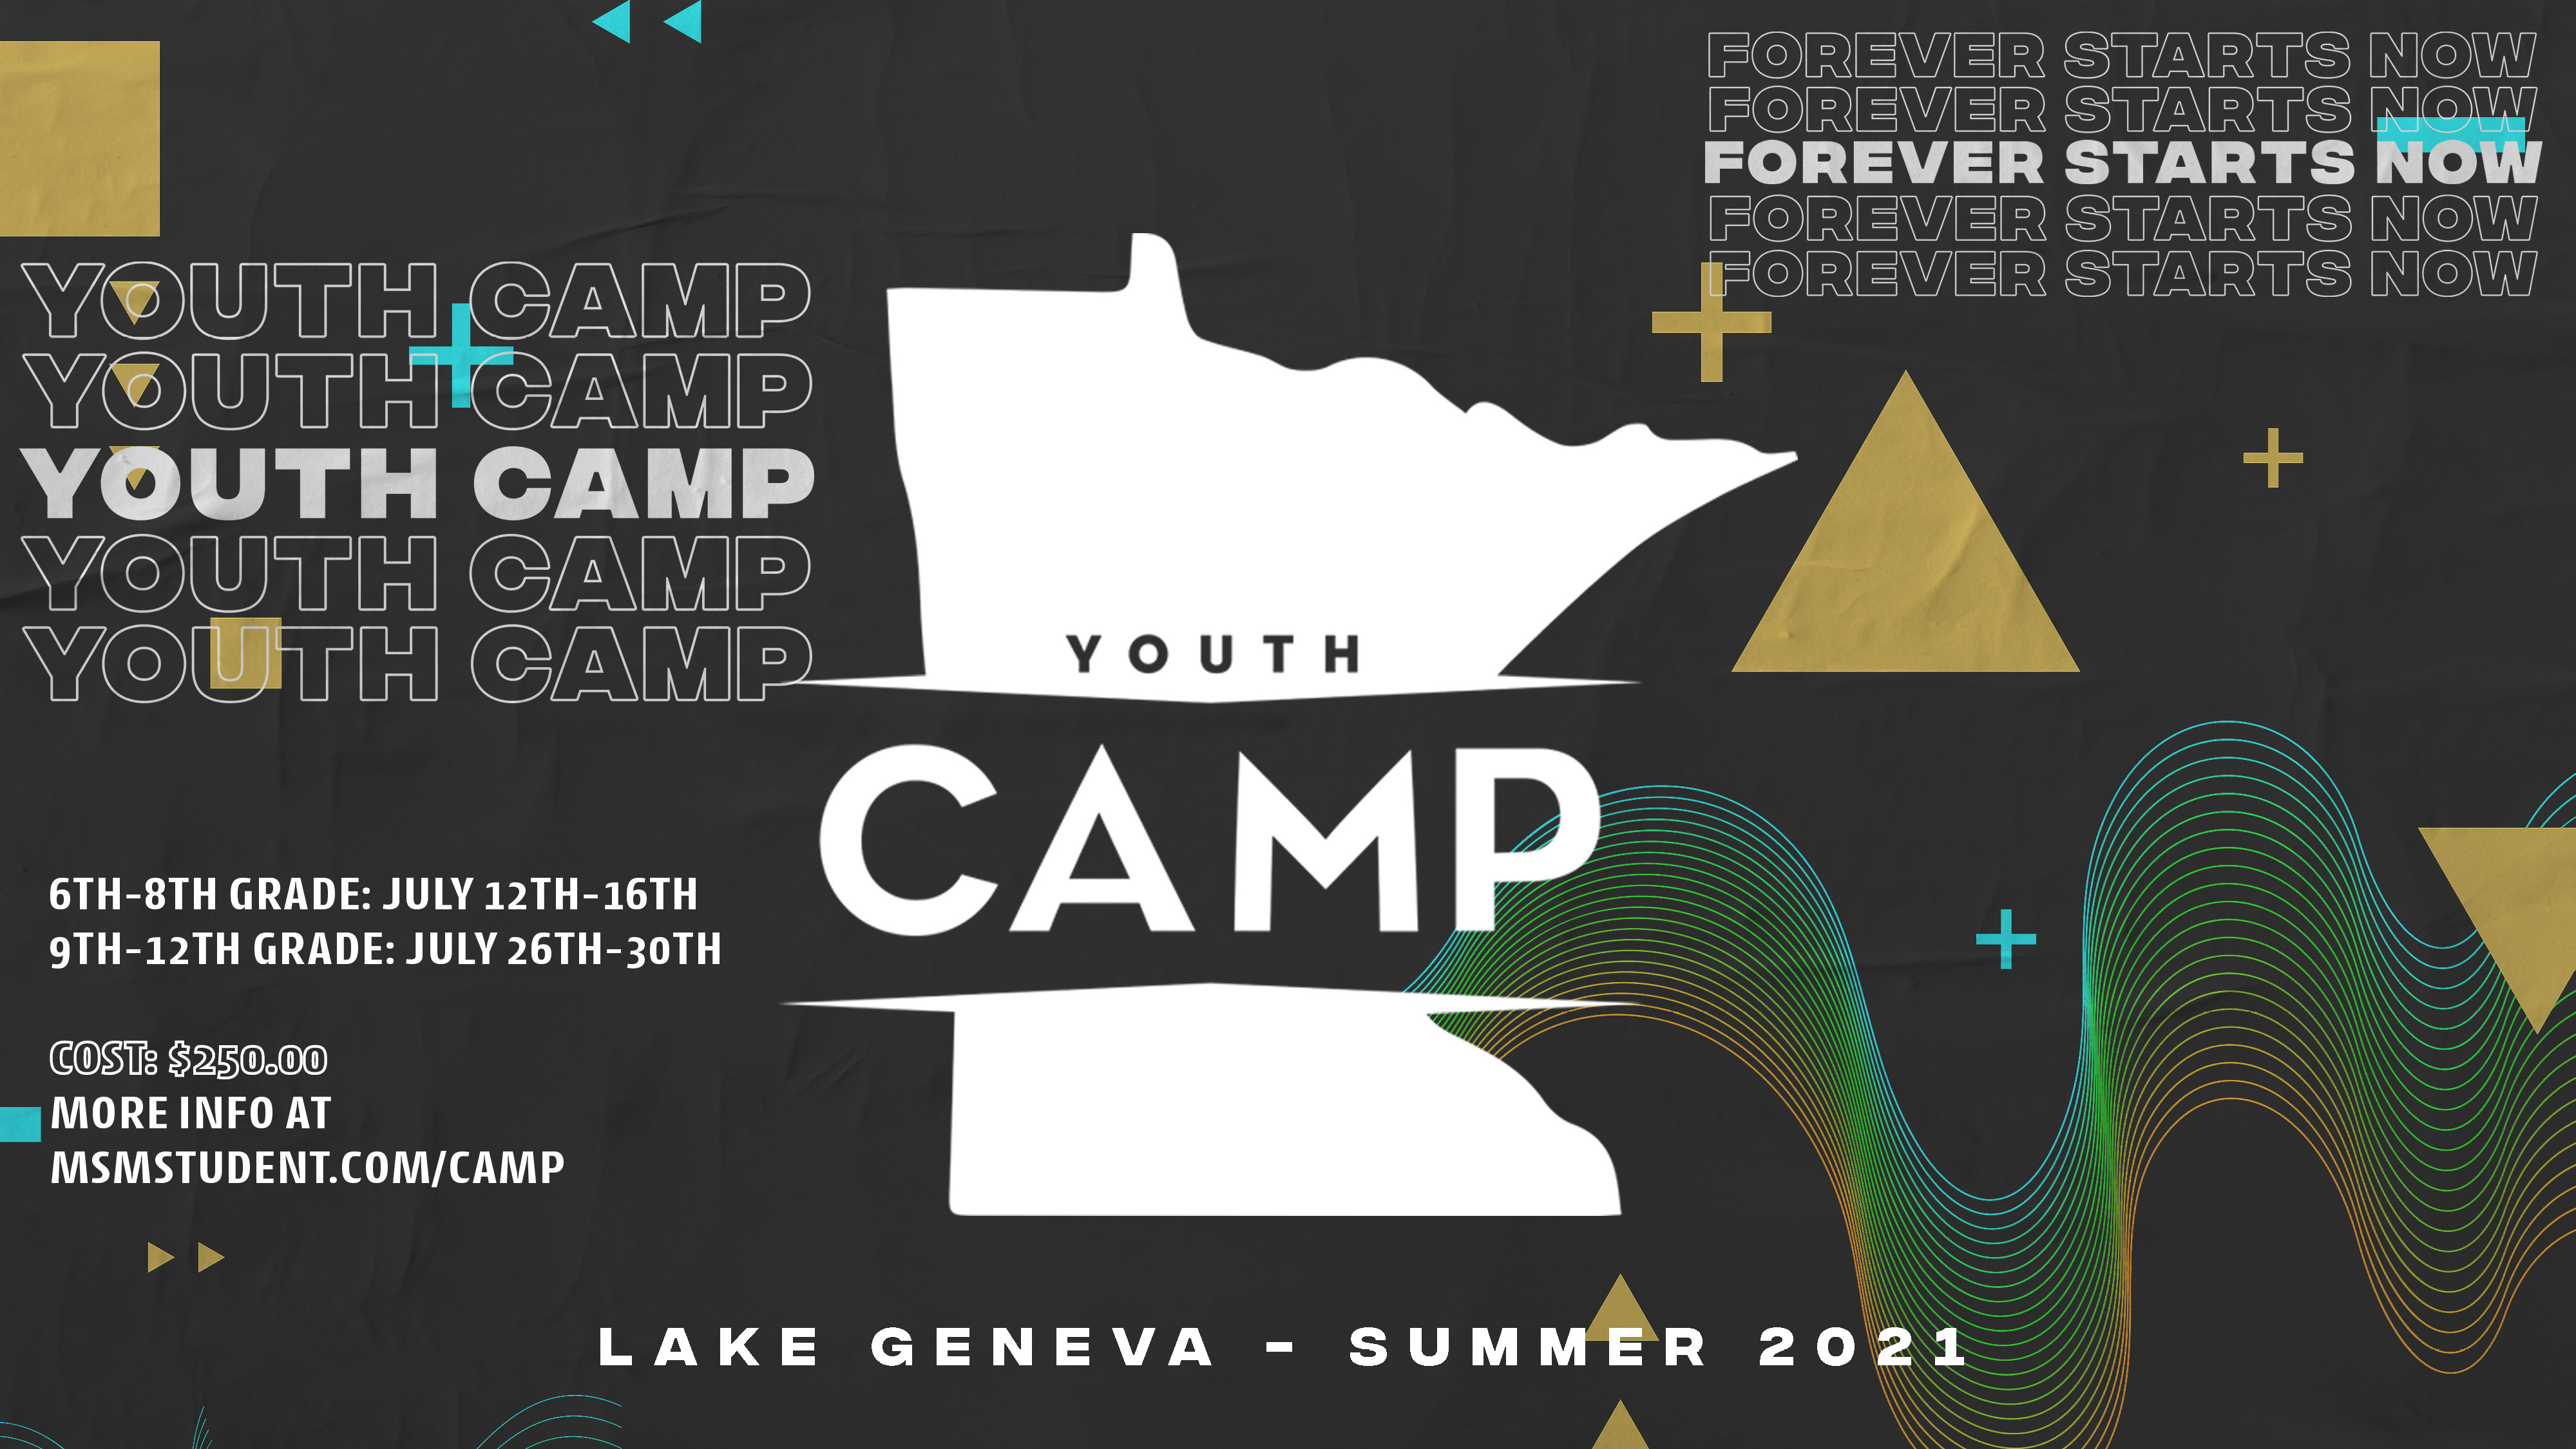 Youth Camp 21 image